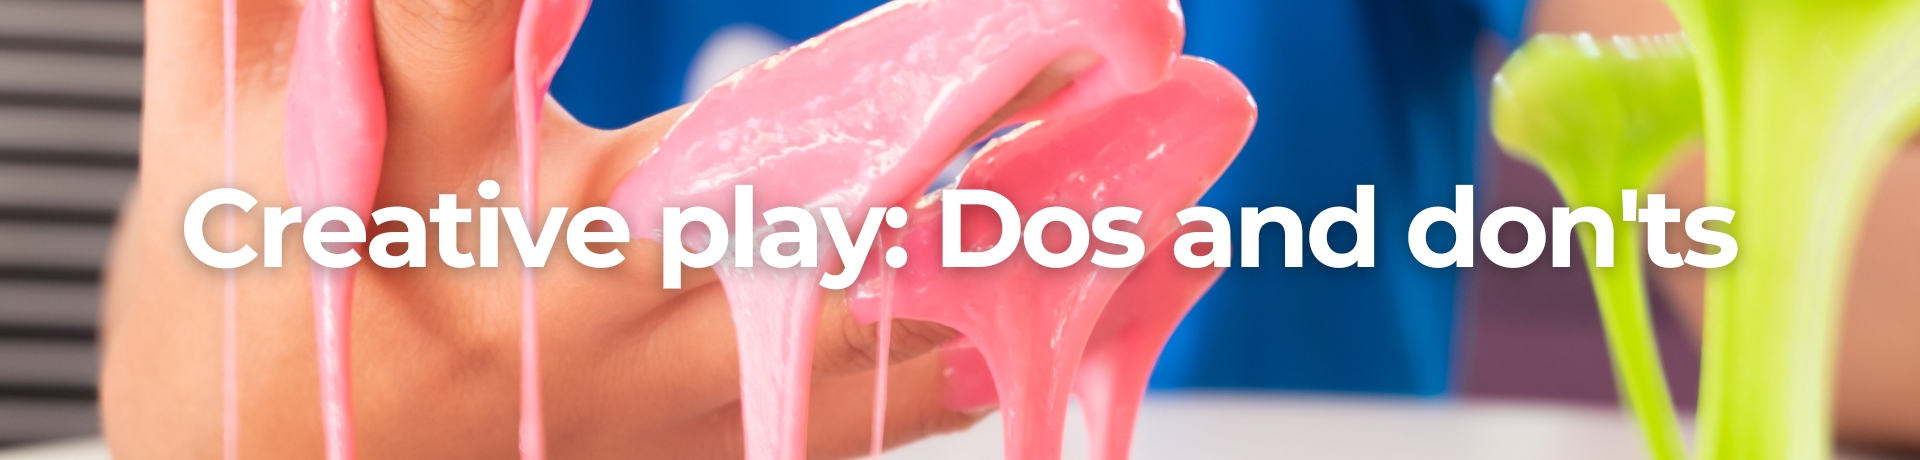 Image of hands playing with slime with text overlay 'creative play dos and don'ts'